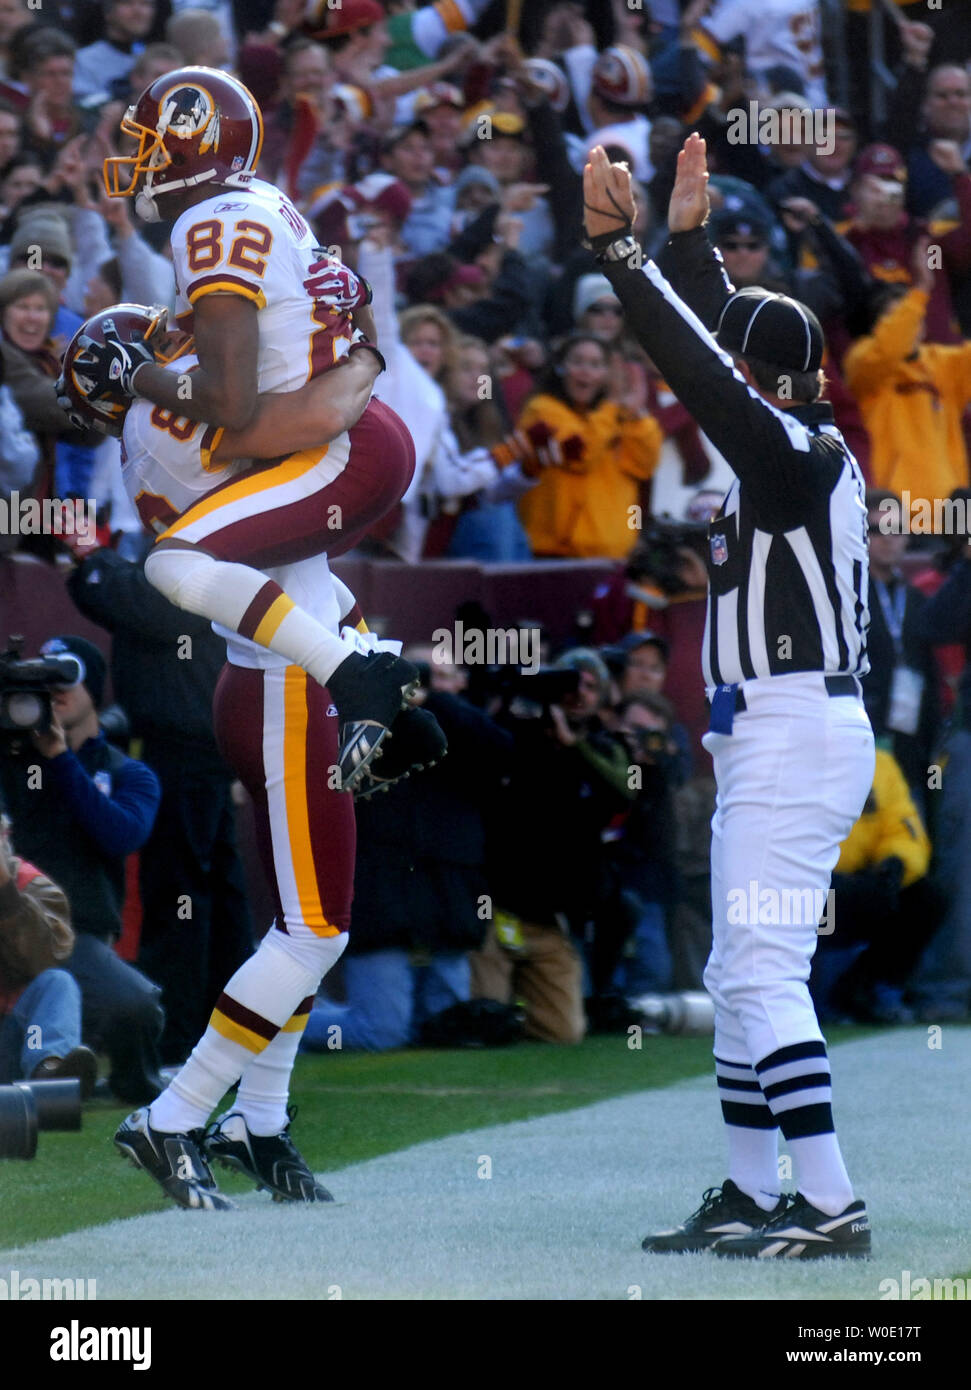 Washington Redskins James Thrash celebrates his 12-yard touchdown reception with teammate Antwaan Randle El (82) against the Philadelphia Eagles during the second quarter at FedEx Field in Landover, Maryland on November 11, 2007. (UPI Photo/Kevin Dietsch) Stock Photo